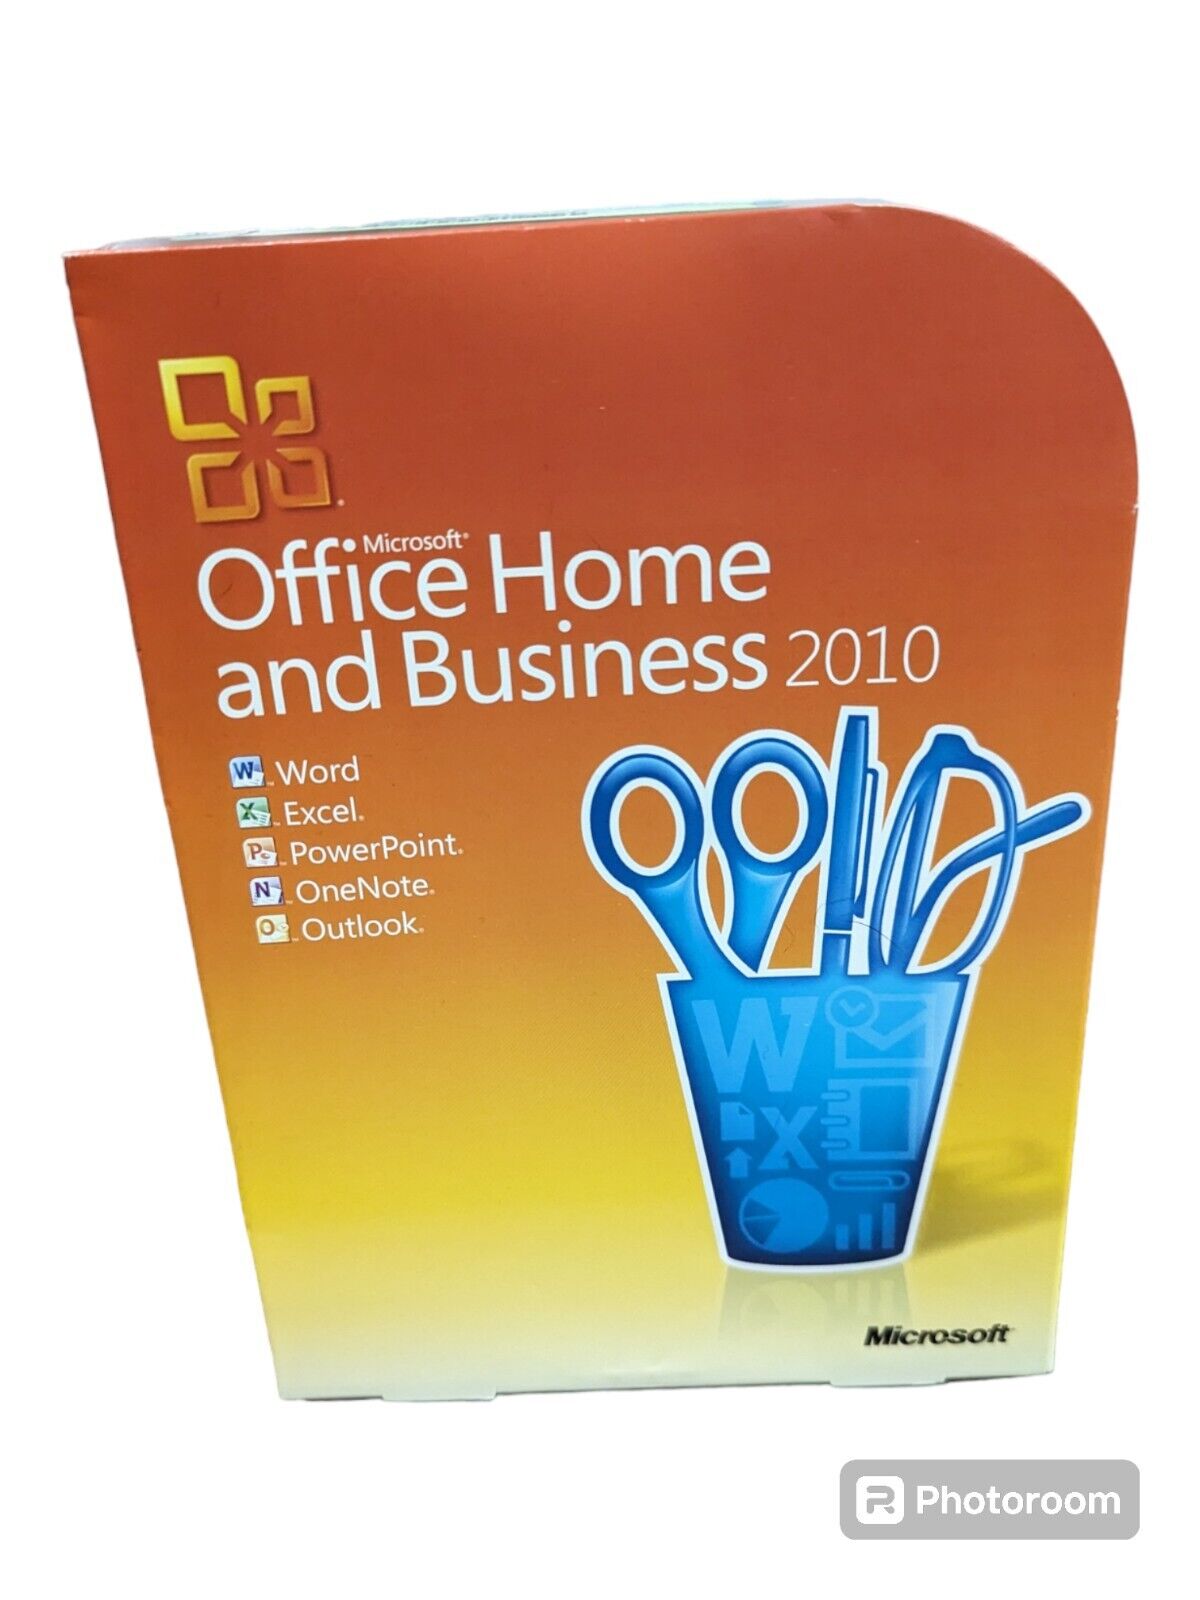 Microsoft Office 2010 Home & Business For 3 PCs Outlook/Excel/Word/PowerPoint 